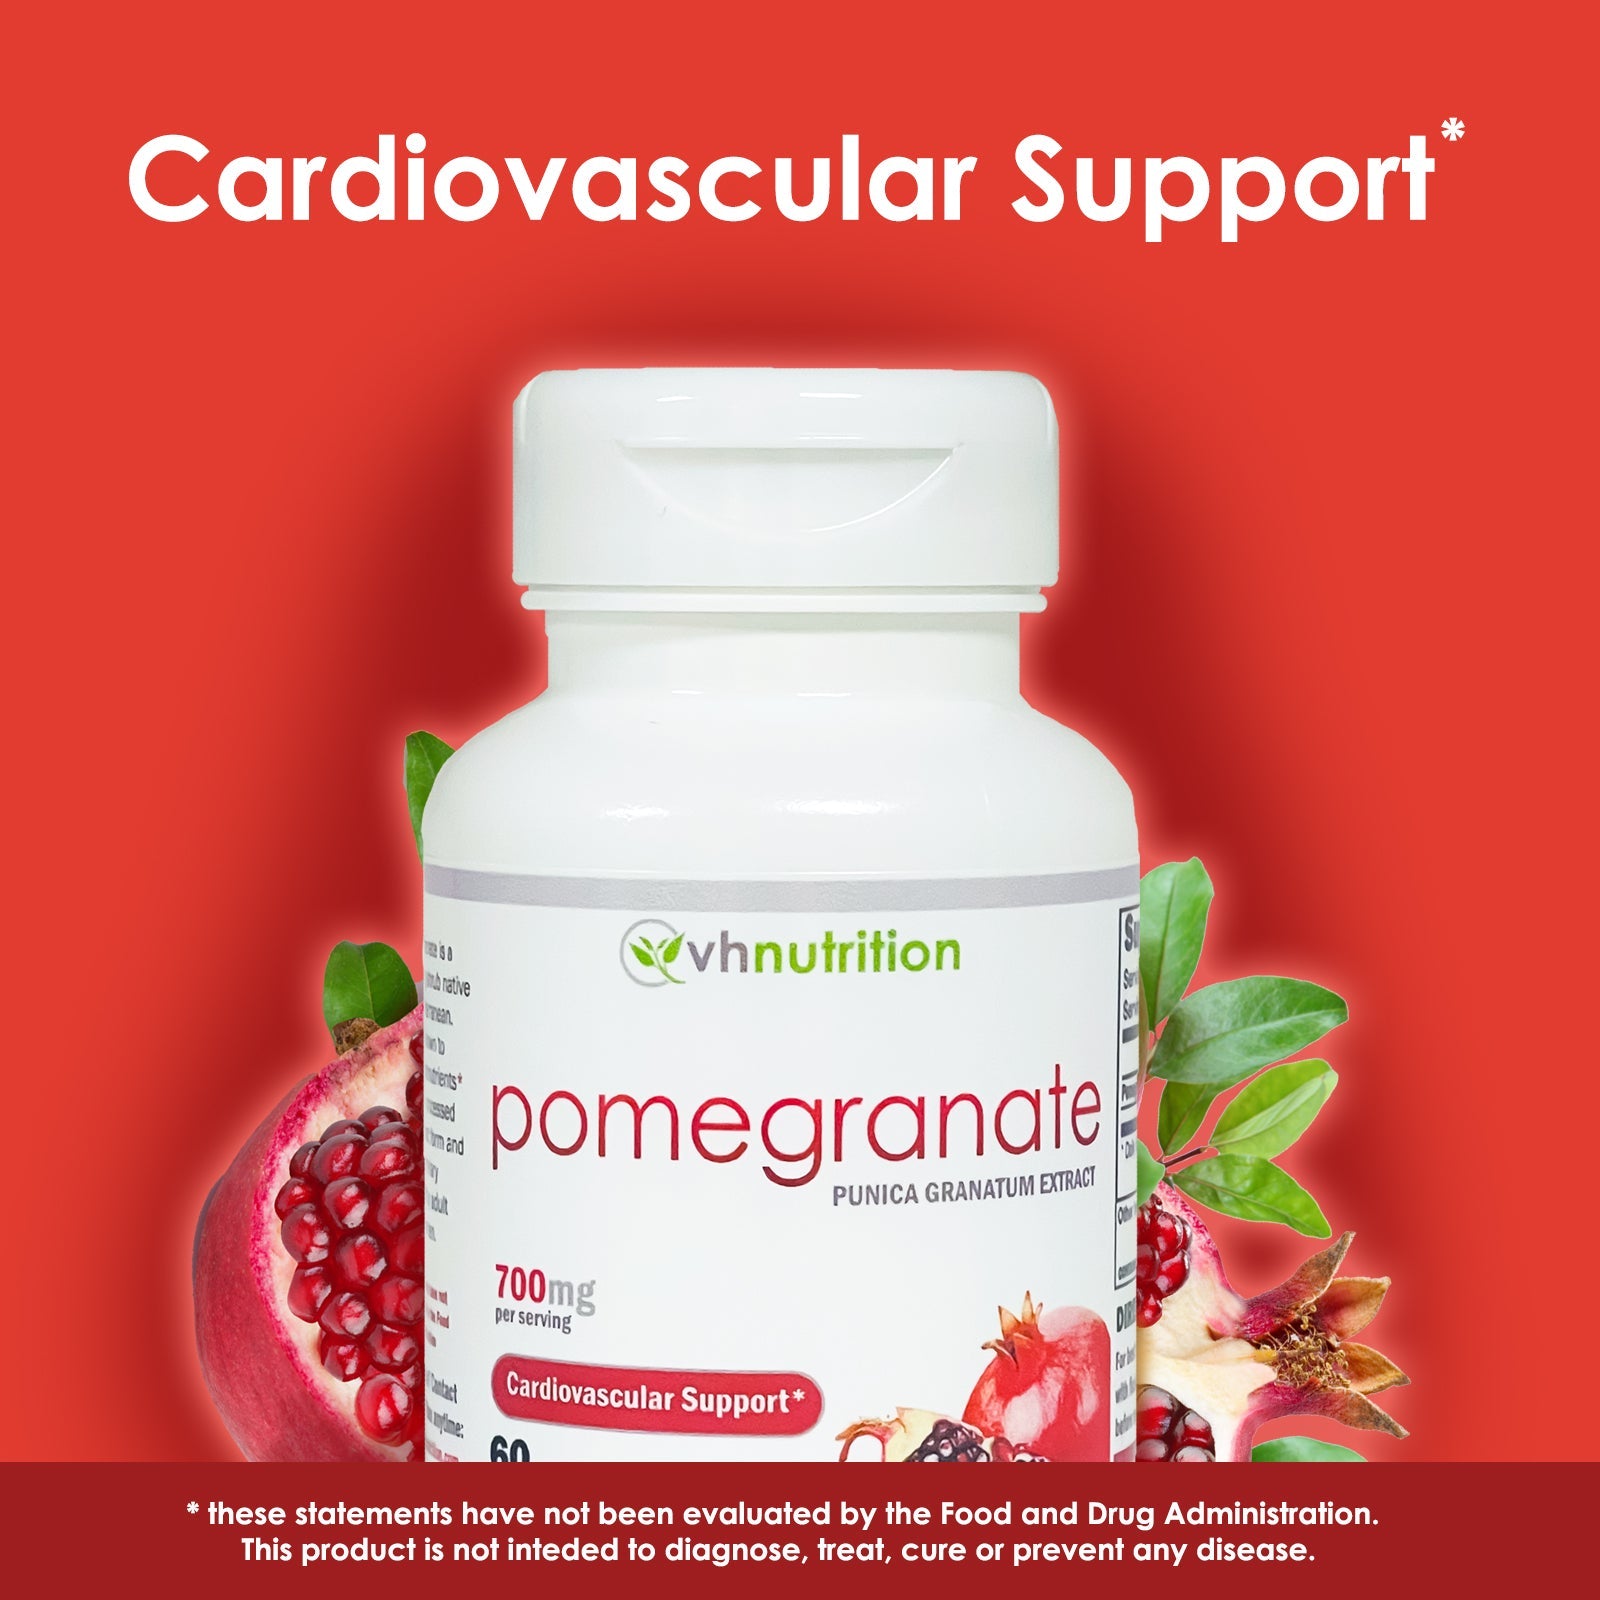 VH Nutrition POMEGRANATE | Cardiovascular Support* Supplement| Punica Granatum Extract | 700mg Proprietary Formula | 60 Capsules